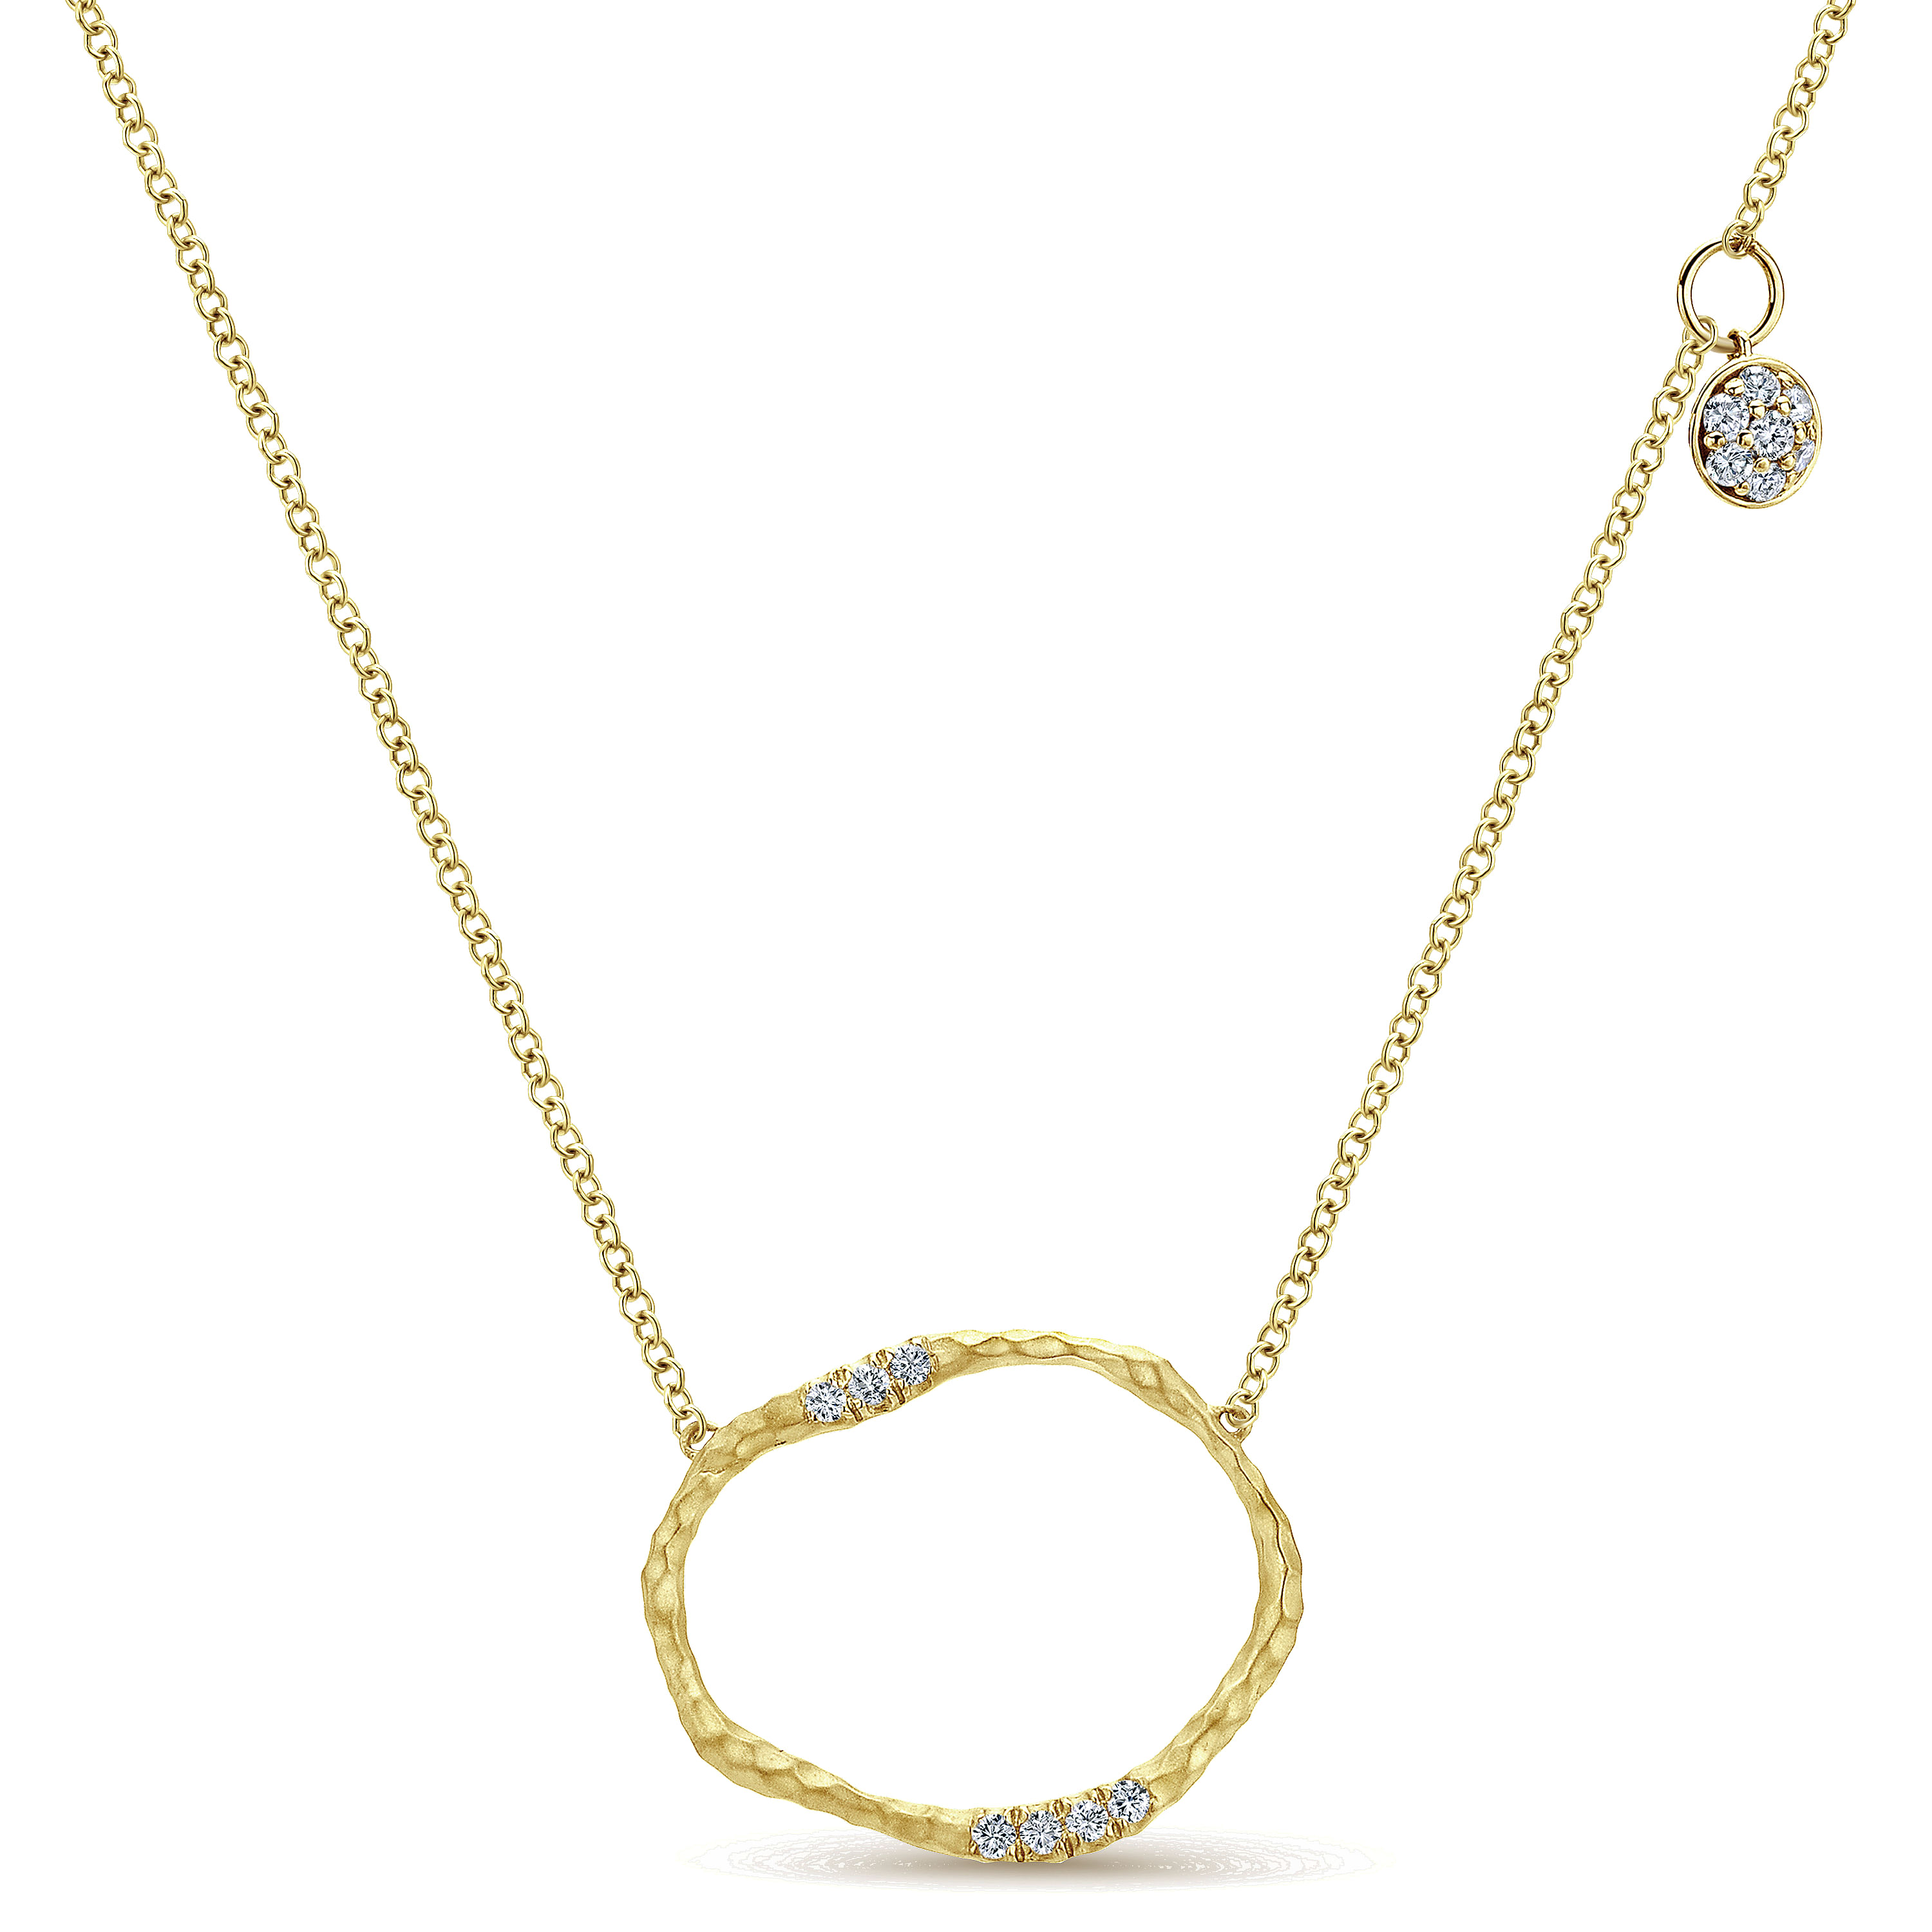 Hammered 14K Yellow Gold Circular Pendant Necklace with Diamonds